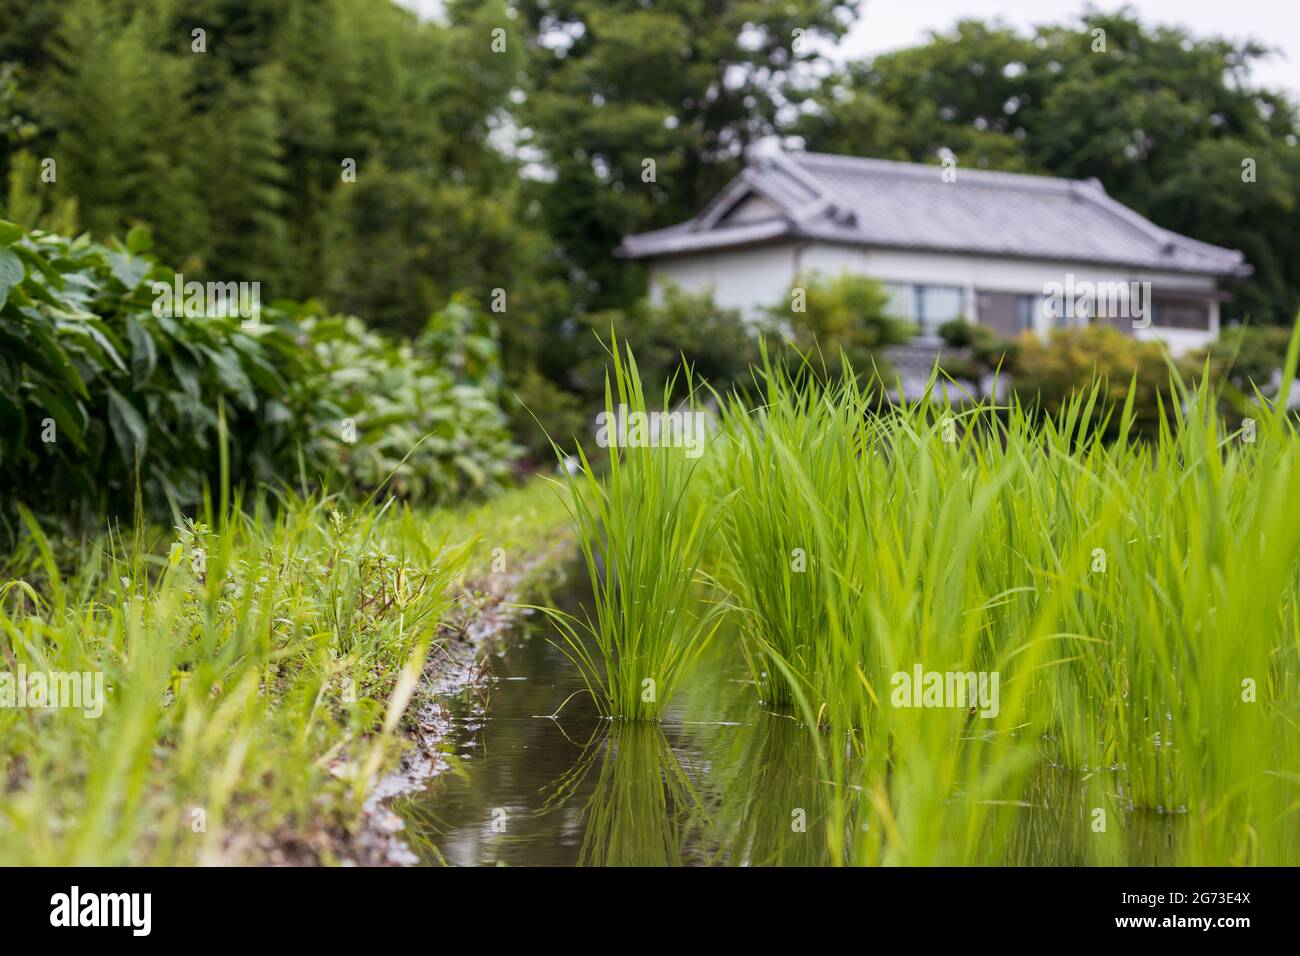 Closeup low-angle view of rice seedlings in flooded field next to Japanese home Stock Photo